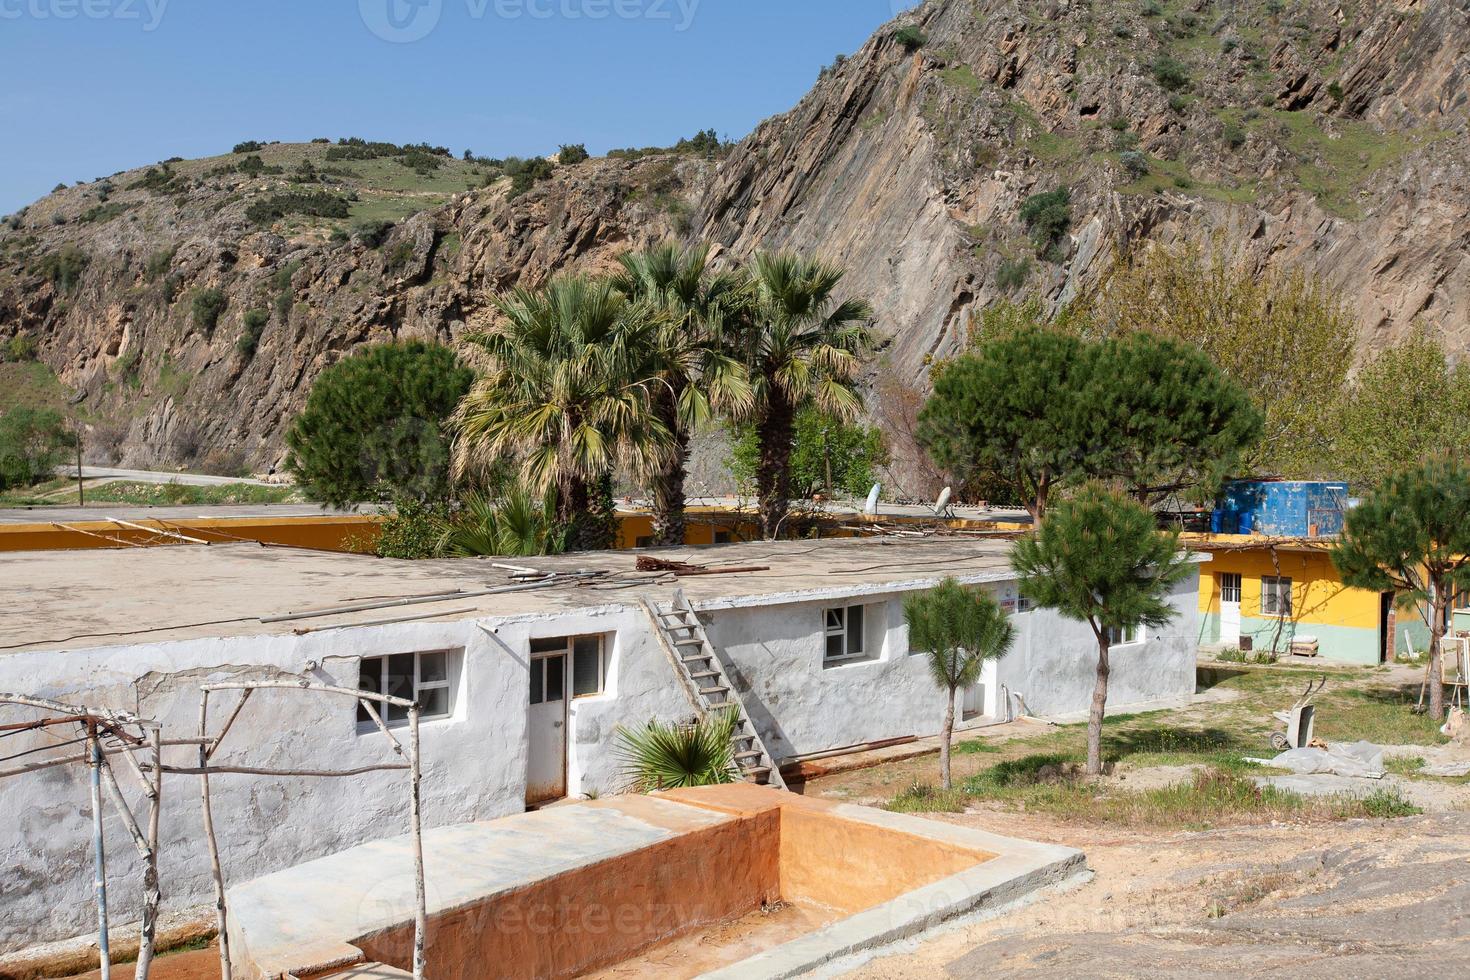 a poor house in a village in the middle of mountains between palm trees in Turkey. photo